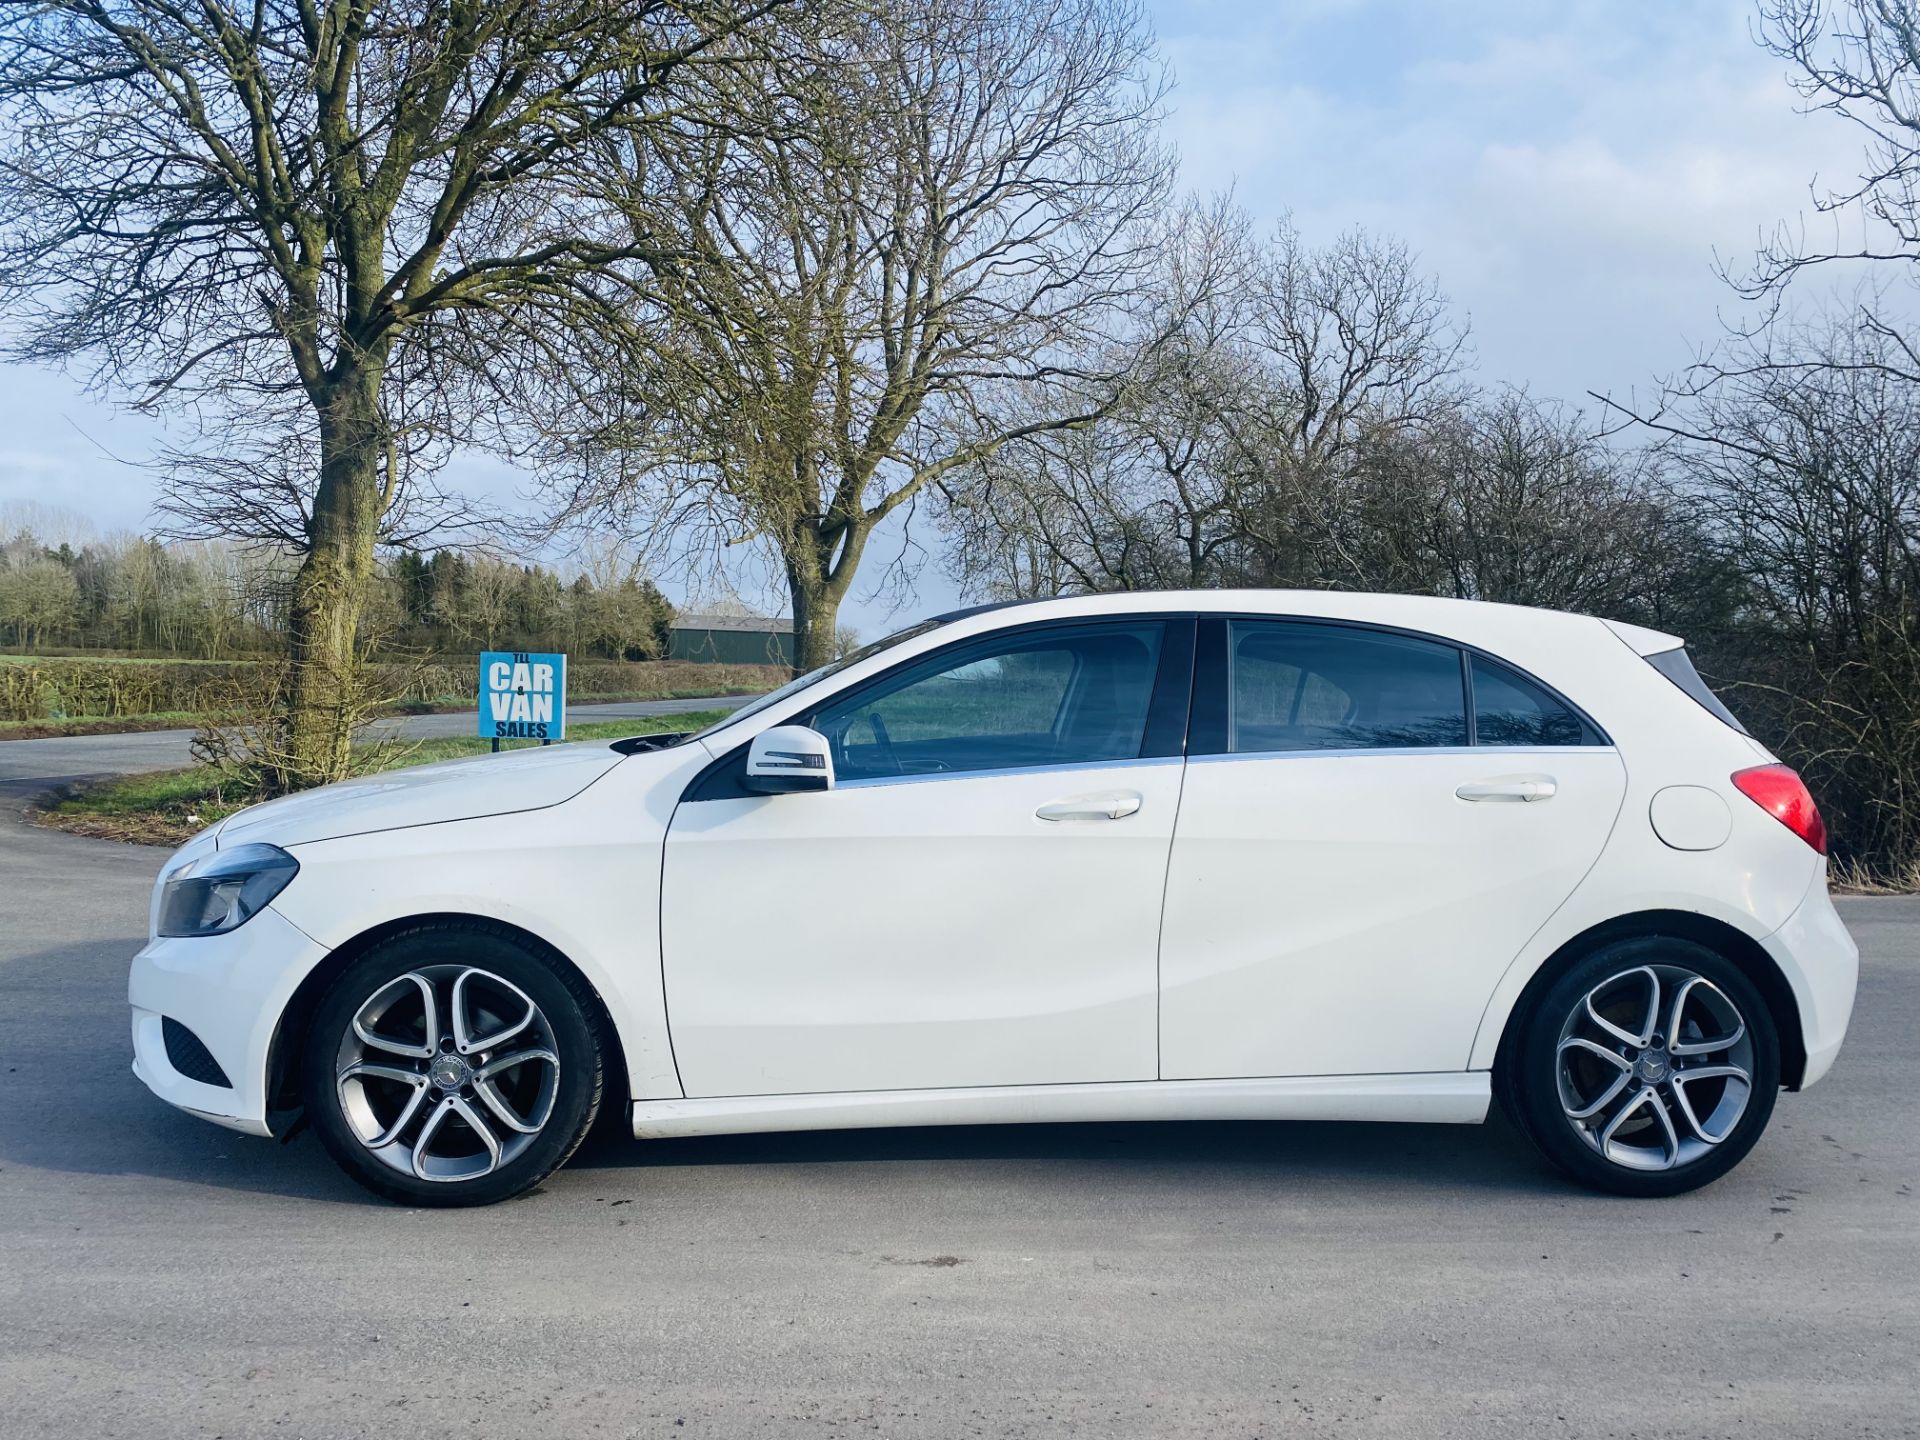 (ON SALE) MERCEDES A180d "SPORT" (13 REG) PRIVATE PLATE INCLUDED - AIR CON - ALLOYS (NO VAT) - Image 5 of 22